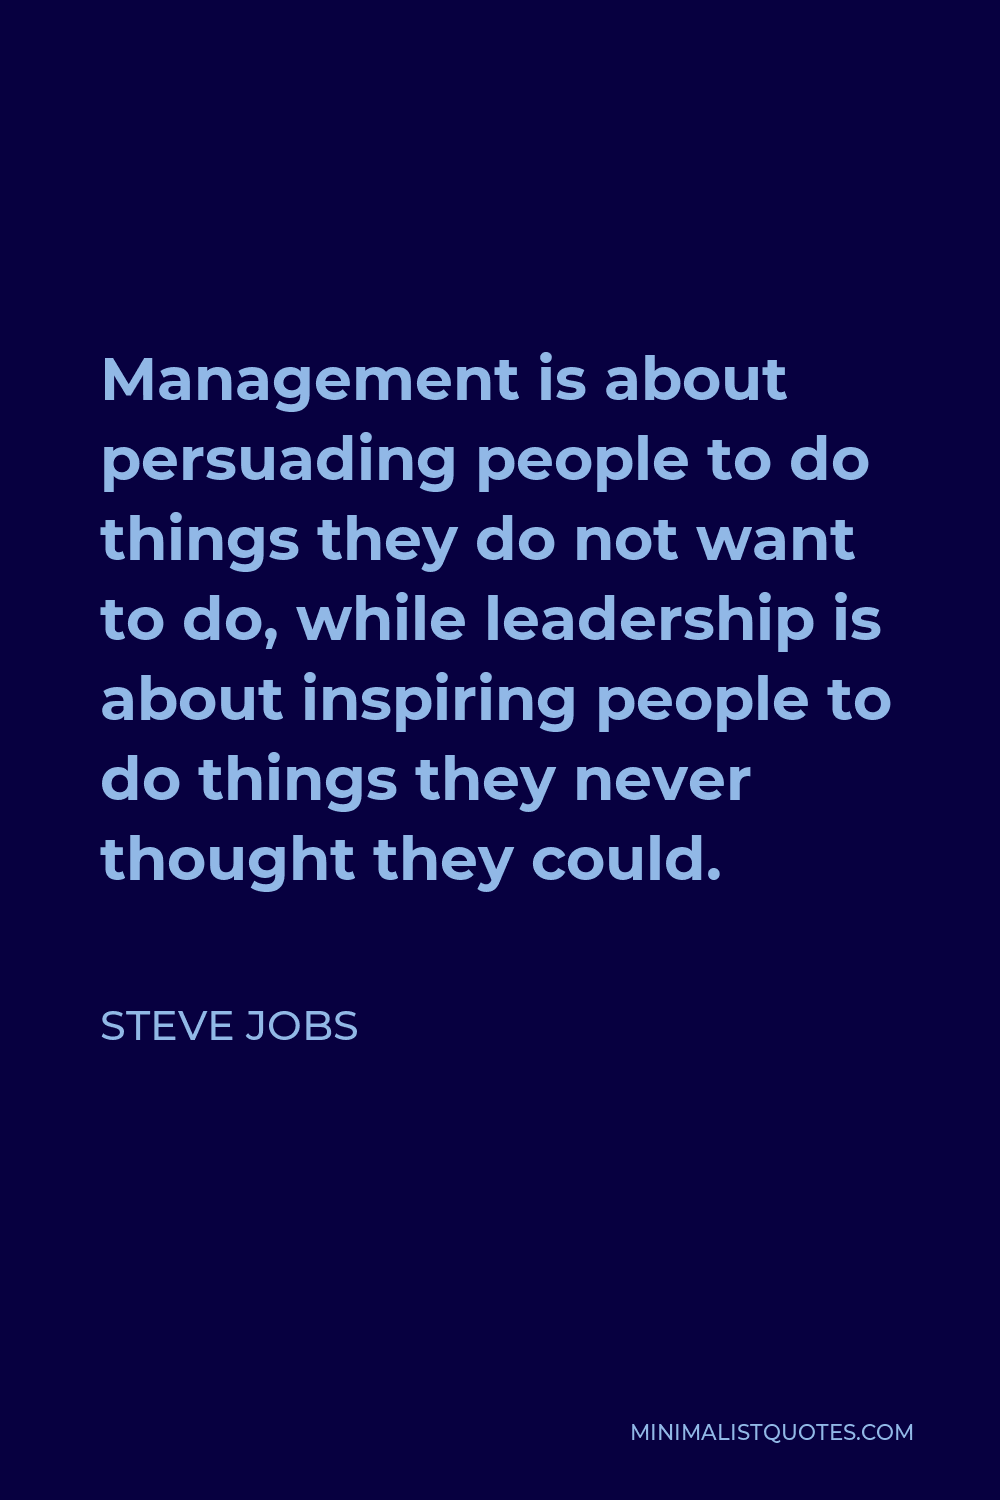 Steve Jobs Quote - Management is about persuading people to do things they do not want to do, while leadership is about inspiring people to do things they never thought they could.